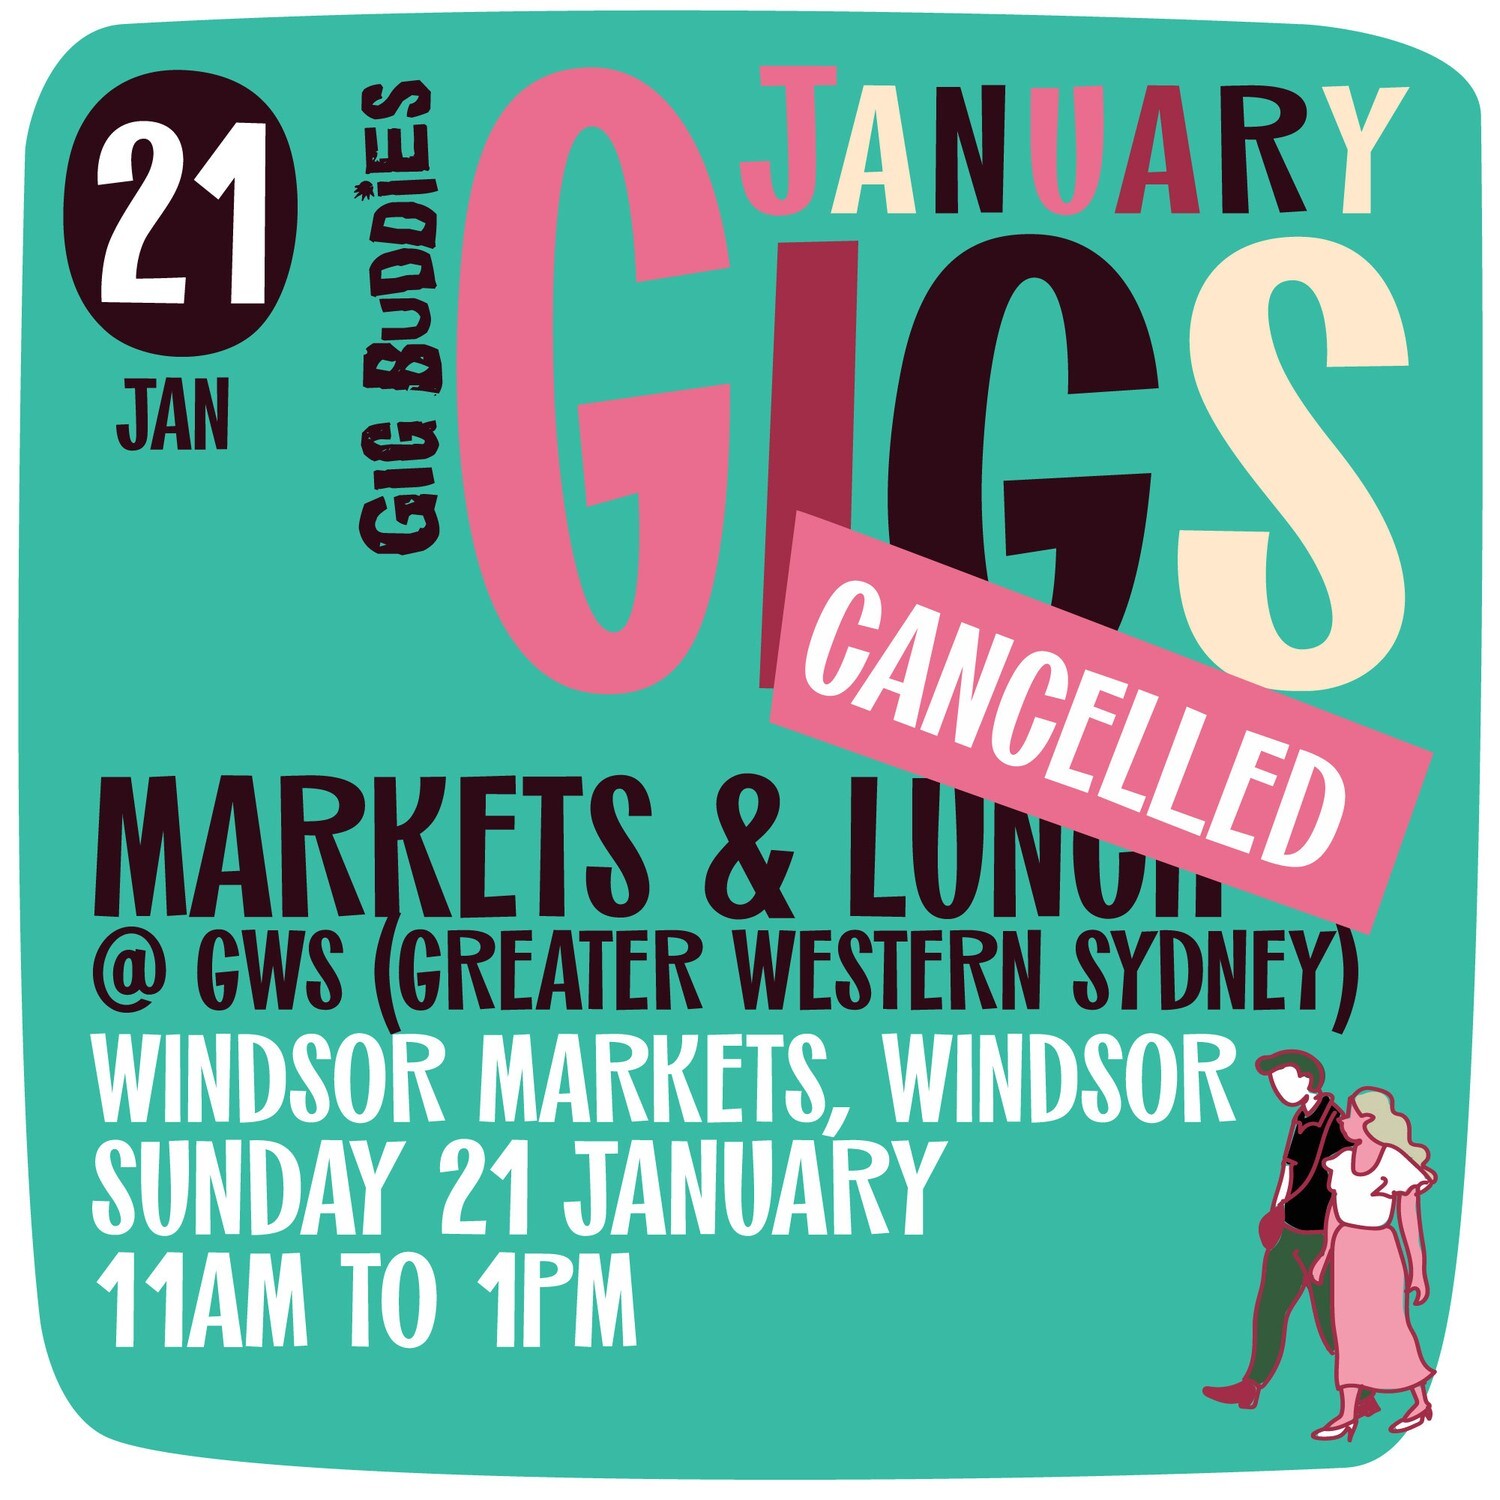 Windsor Markets and lunch - Sunday 21 January